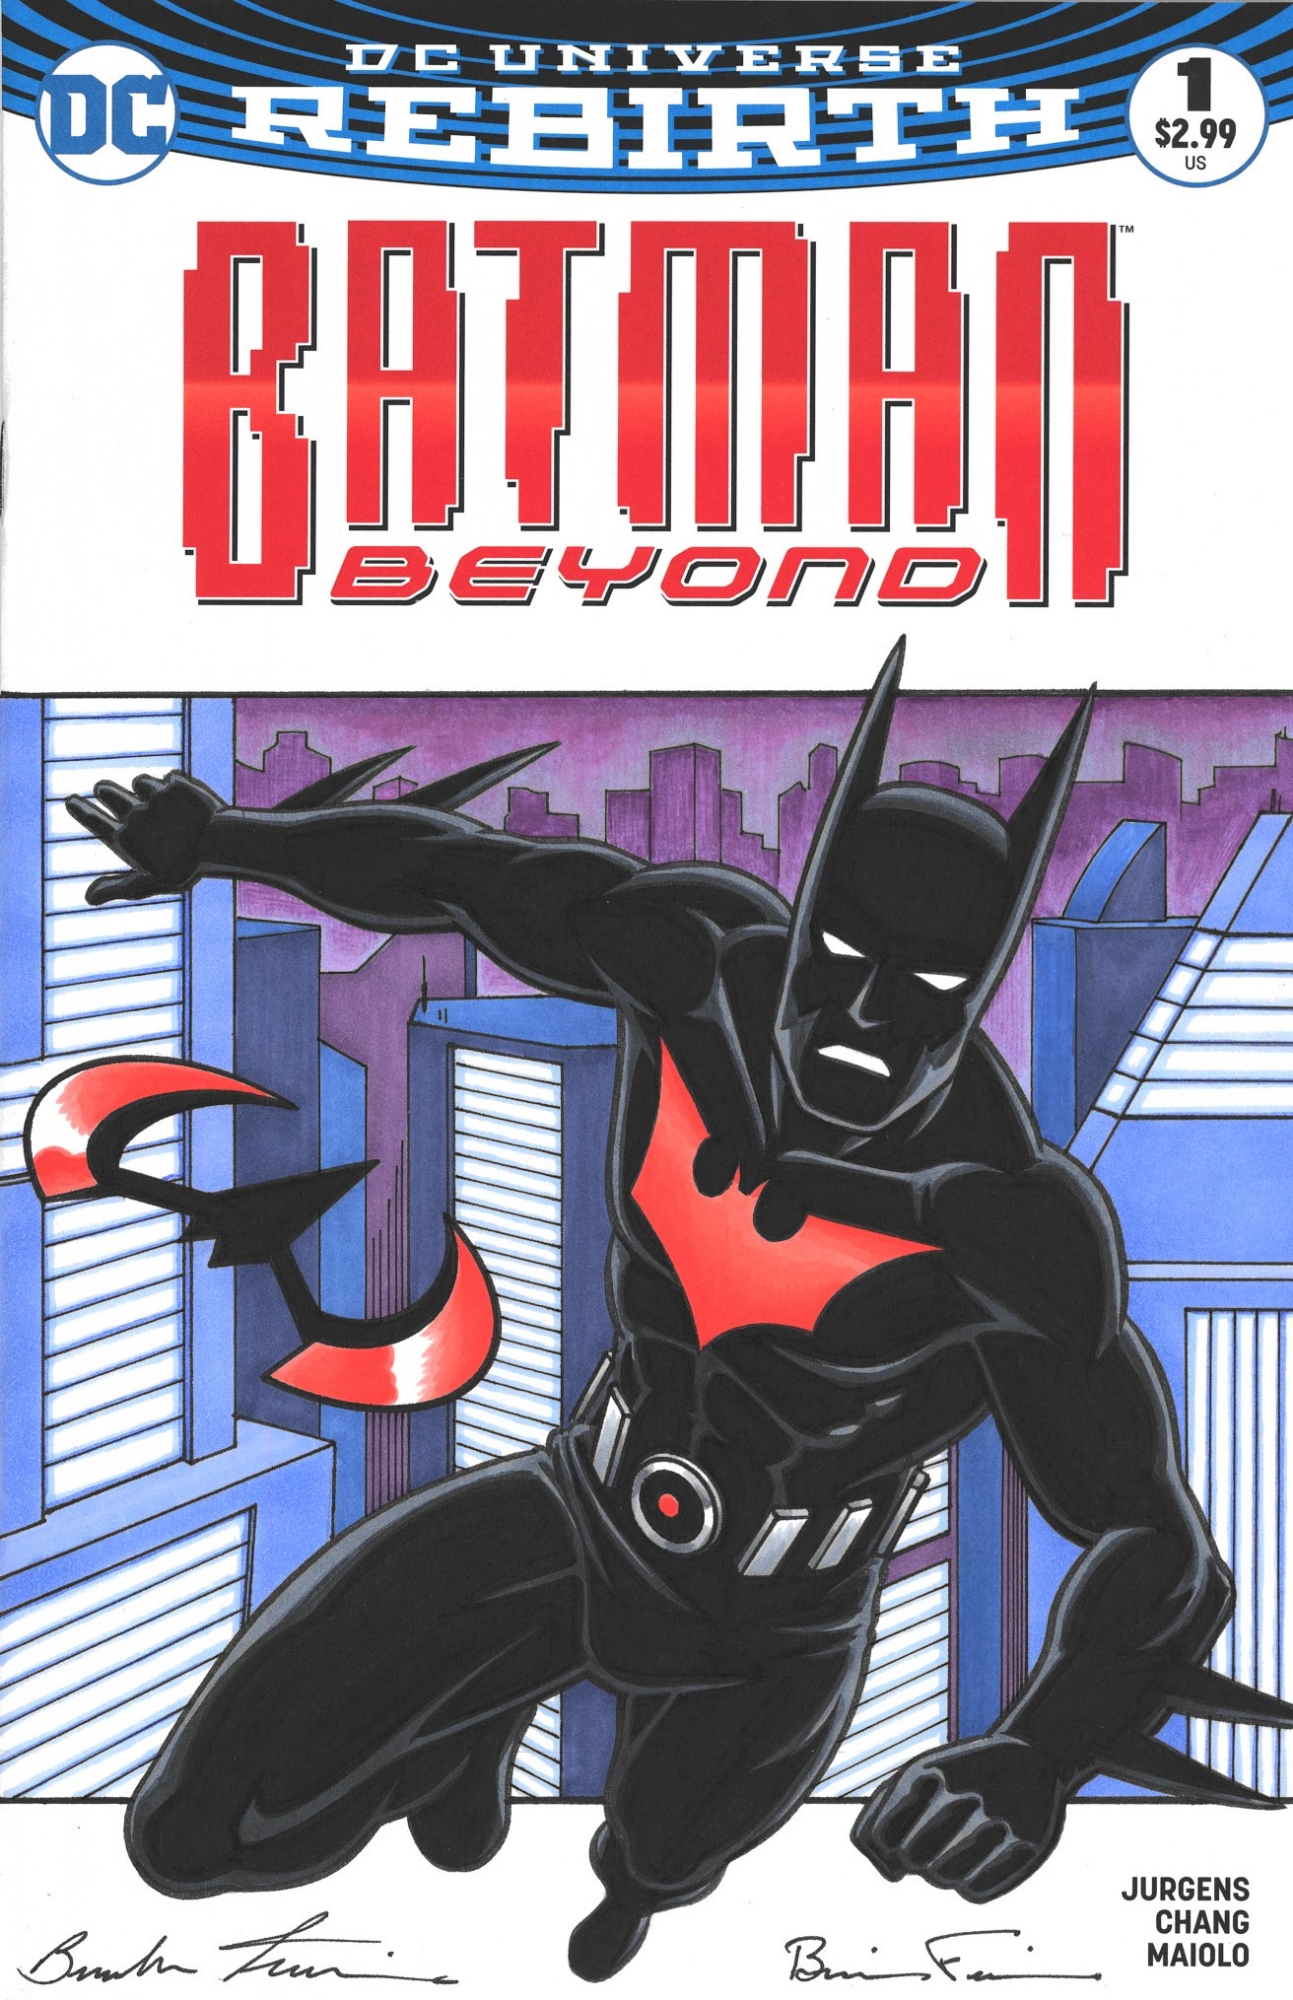 Batman Beyond (Terry McGinnis) sketch cover pencils by Brendon Fraim inks  and colors by Brian Fraim , in James Posey's Purchased art Comic Art  Gallery Room